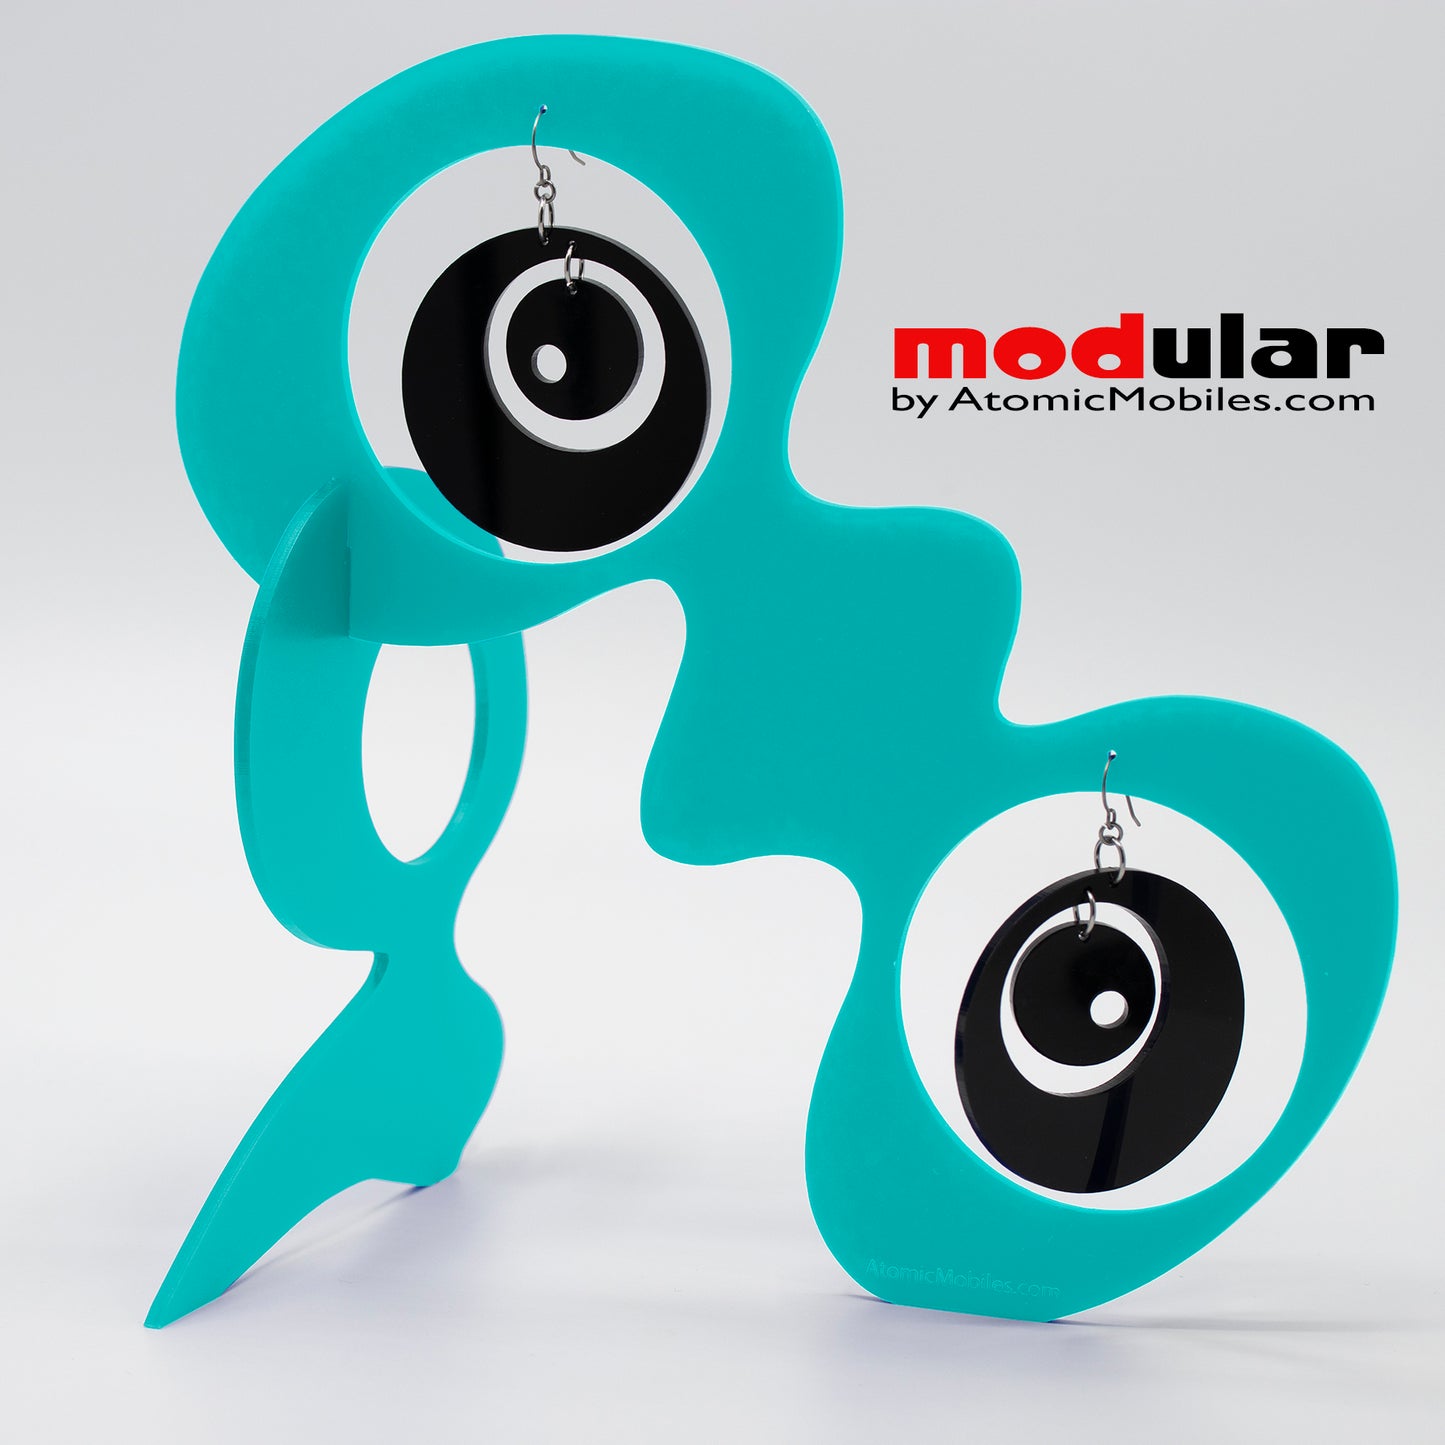 Handmade Groovy style earrings and stabile kinetic modern art sculpture in Aqua and Black by AtomicMobiles.com